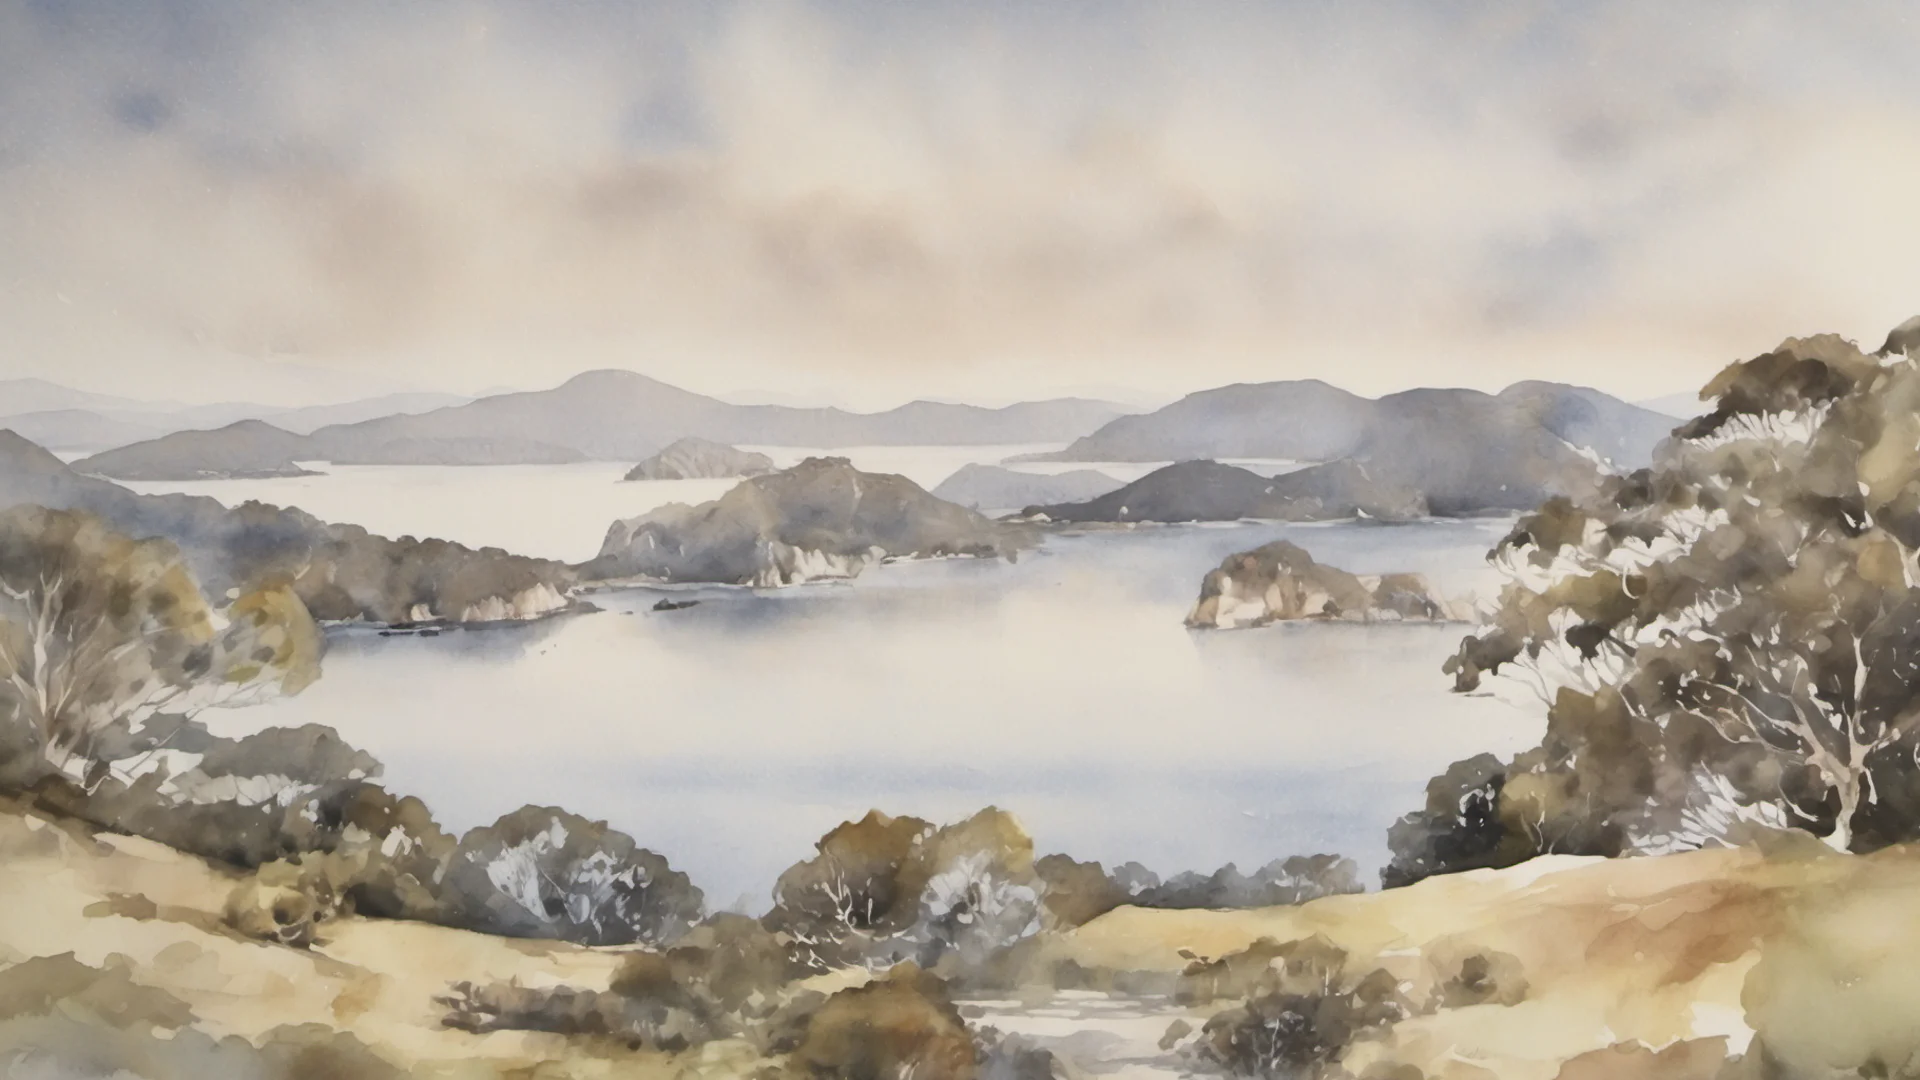 aipicturesque landscape watercolor beautiful neutral tones bay of islands grace stunning   amazing awesome portrait 2 wide